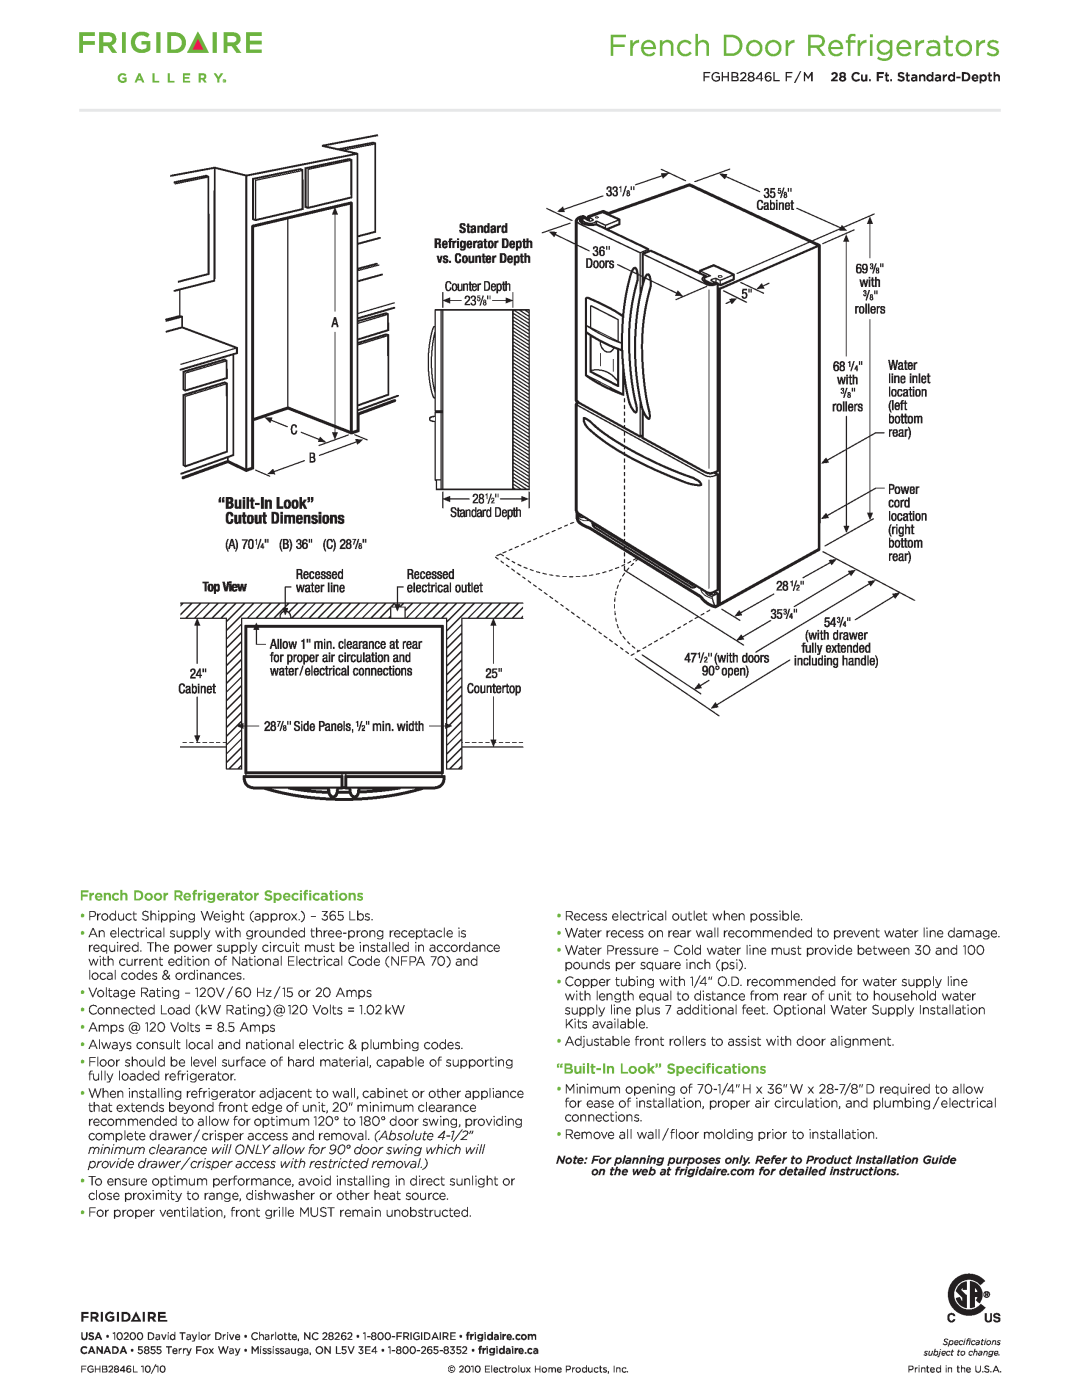 Frigidaire FGHB2846L F/M dimensions French Door Refrigerator Specifications, “Built-In Look” Specifications 